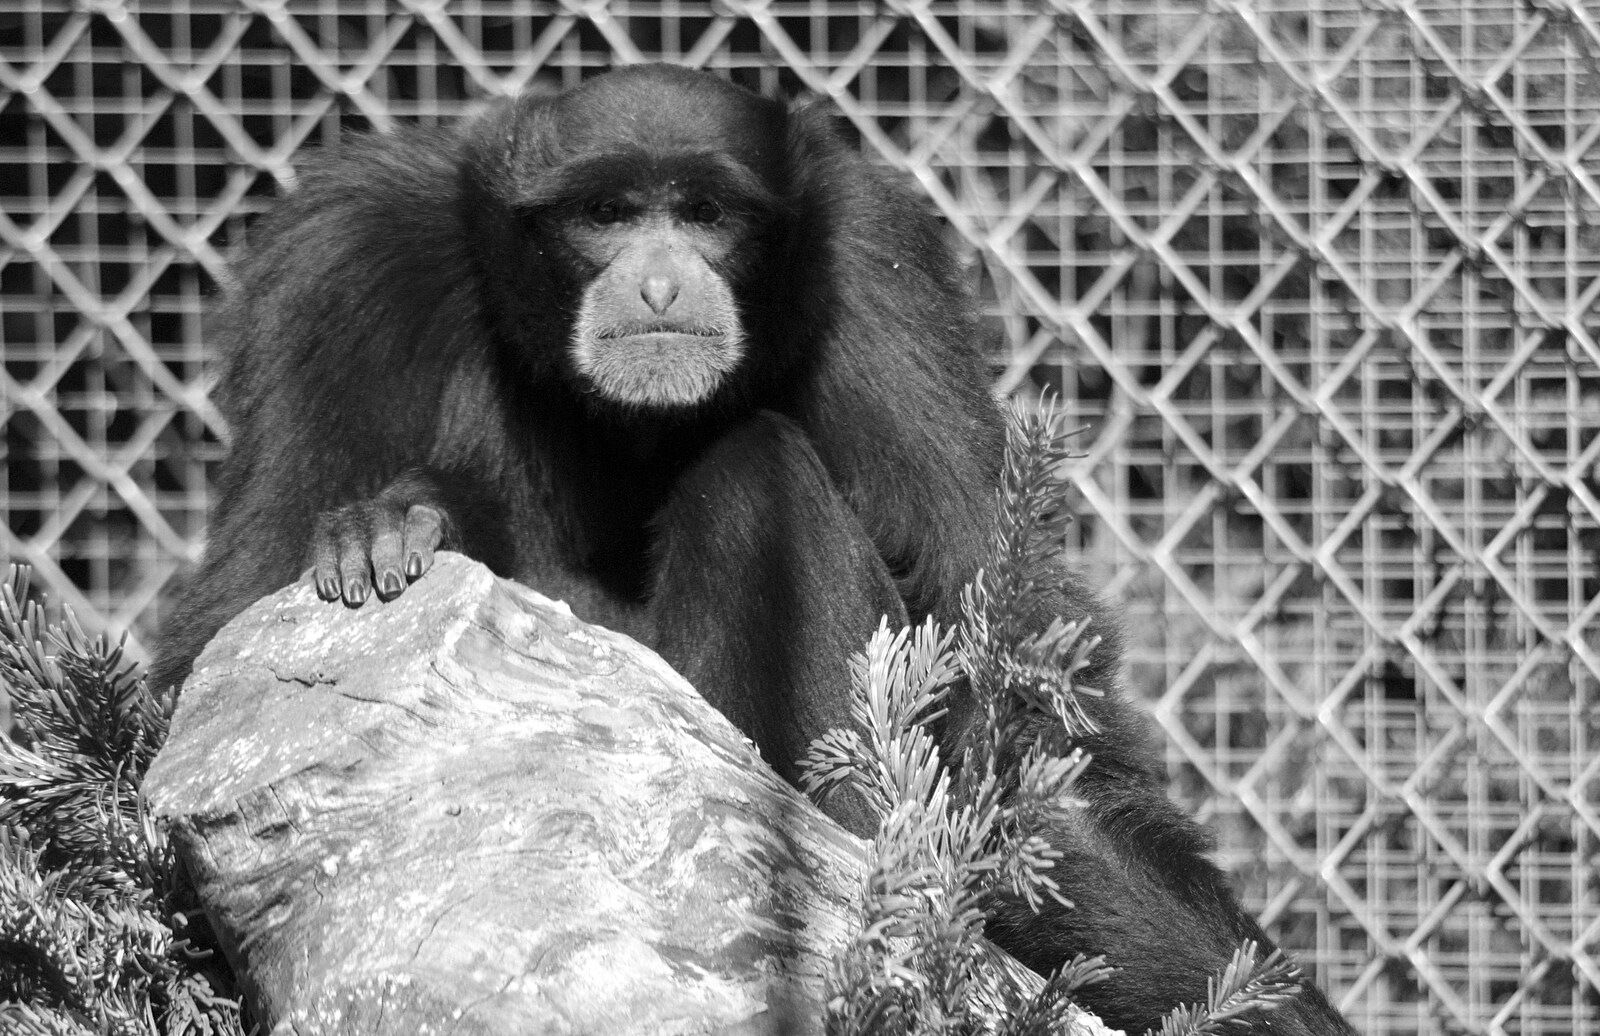 A sad-looking ape from Another Trip to Banham Zoo, Banham, Norfolk - 25th March 2016